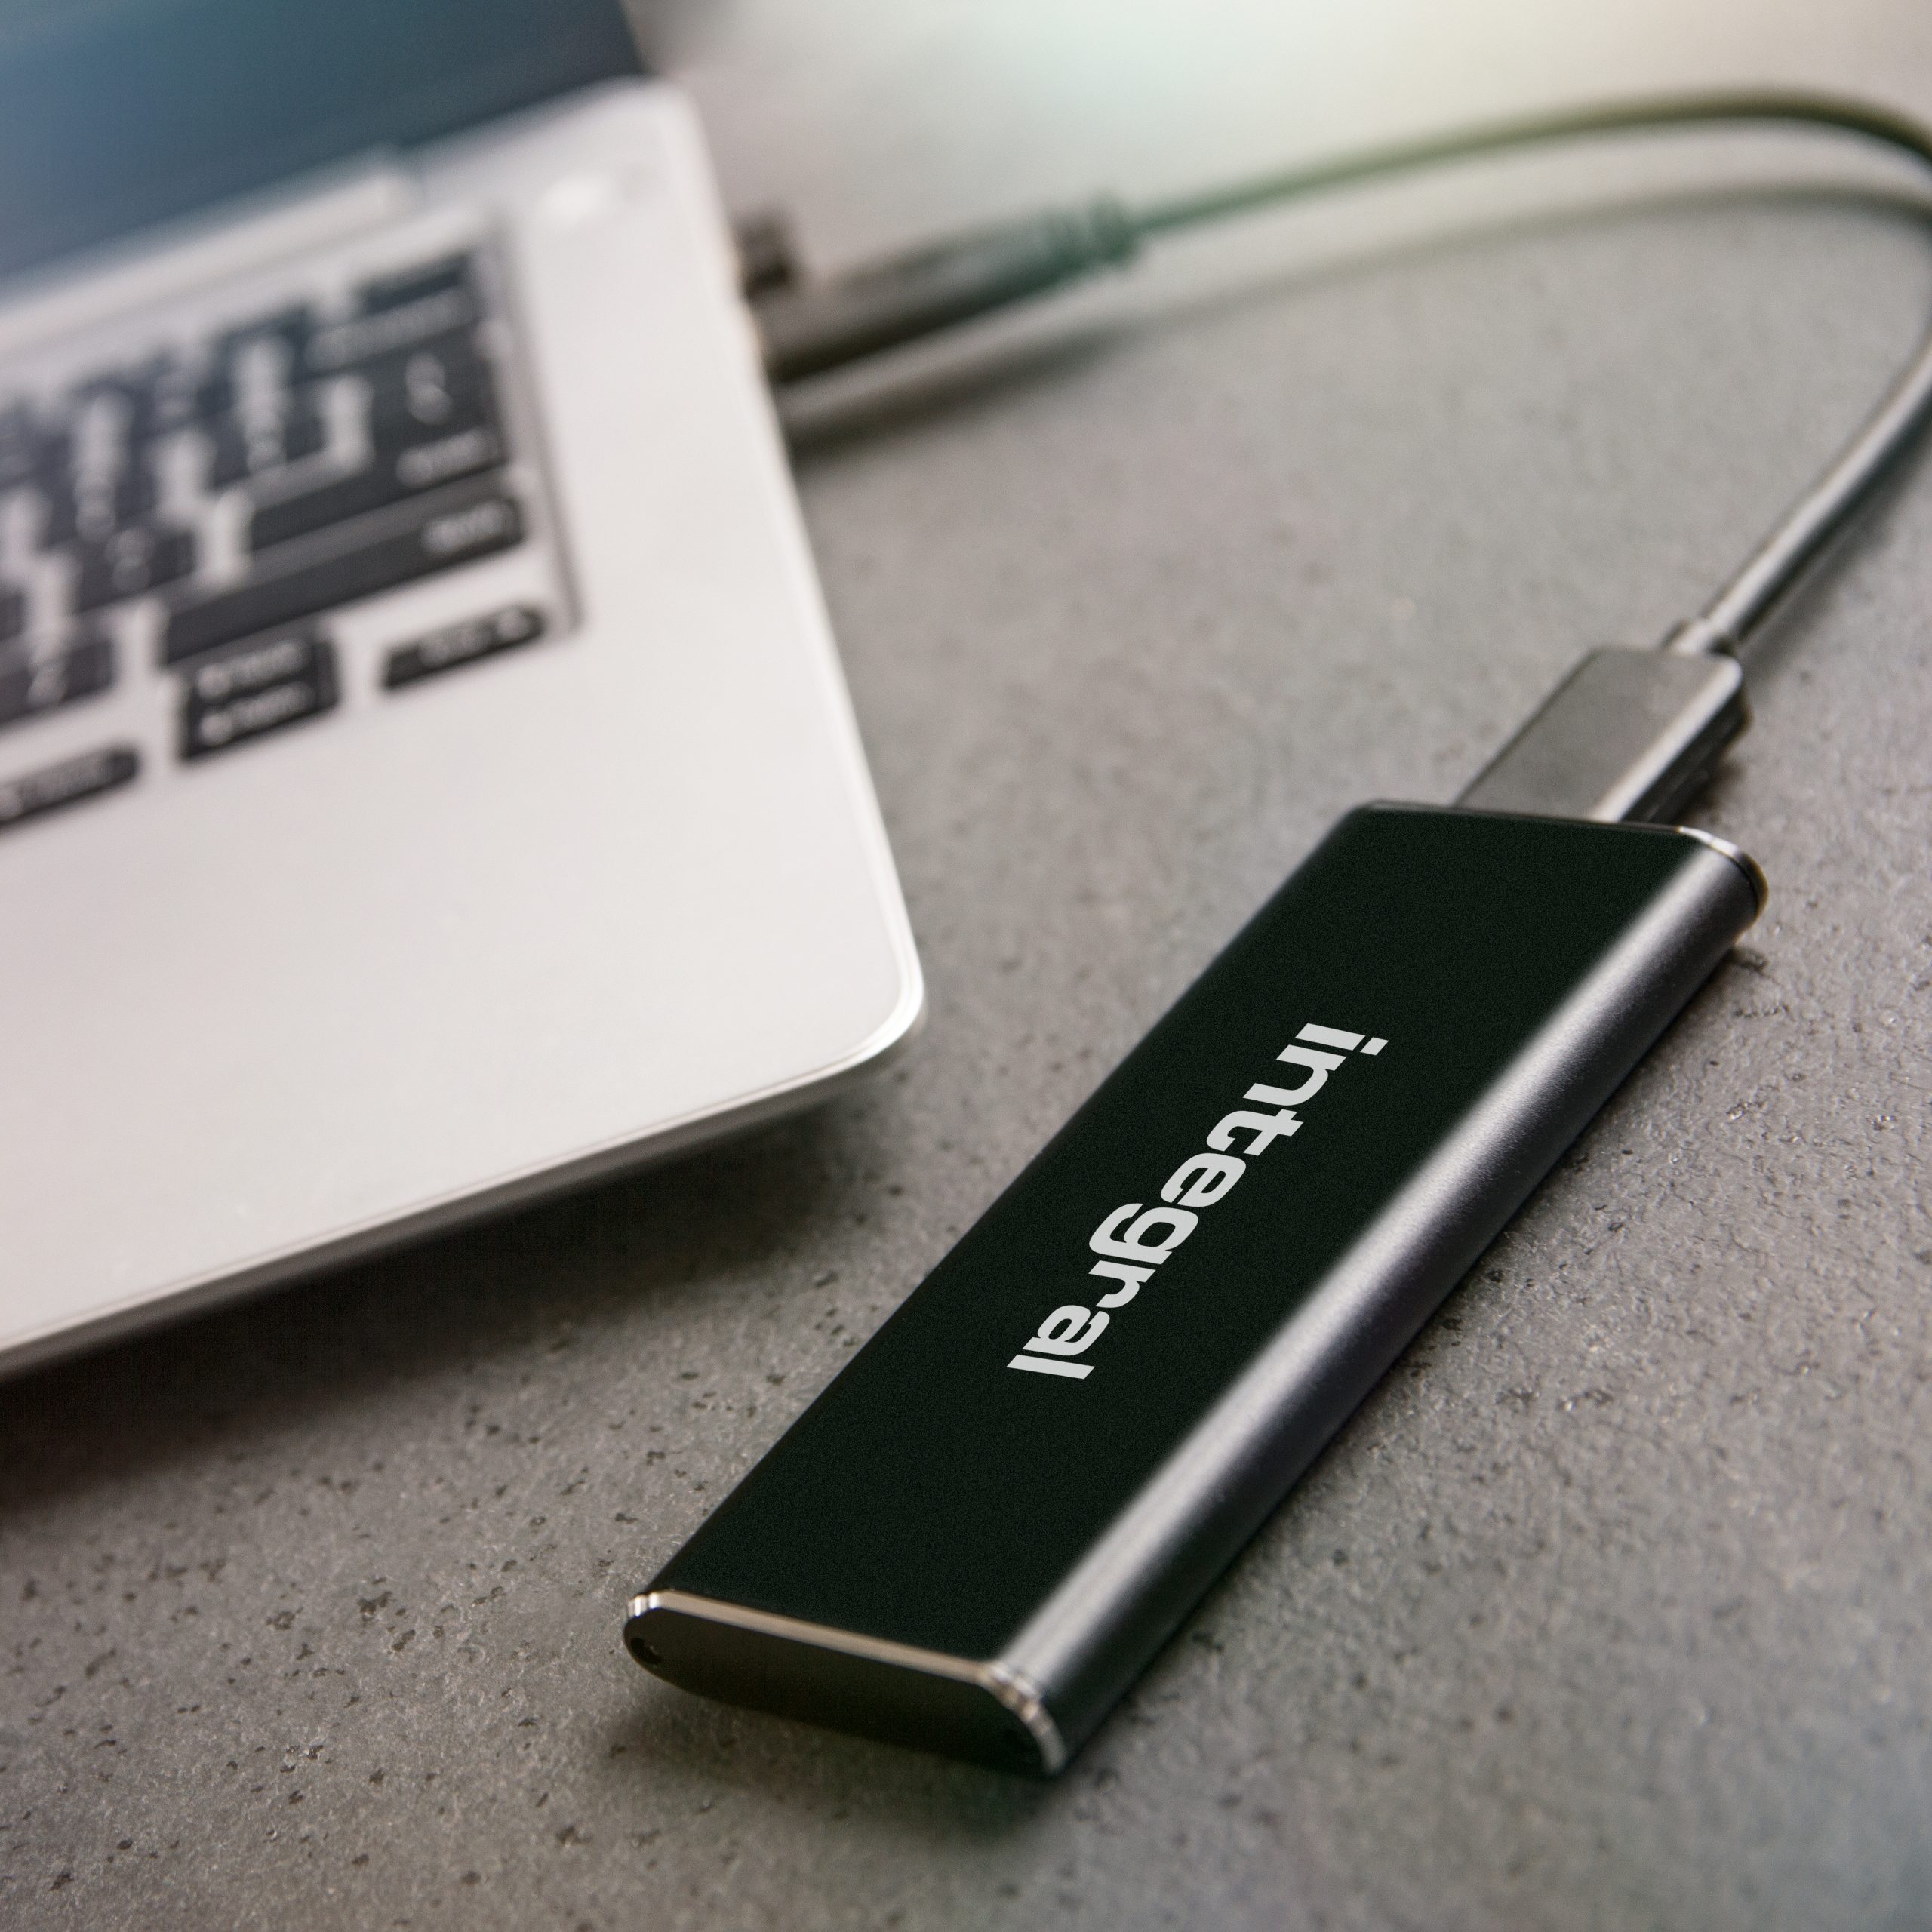 Portable Solid State Drive SSD with Aluminium Casing